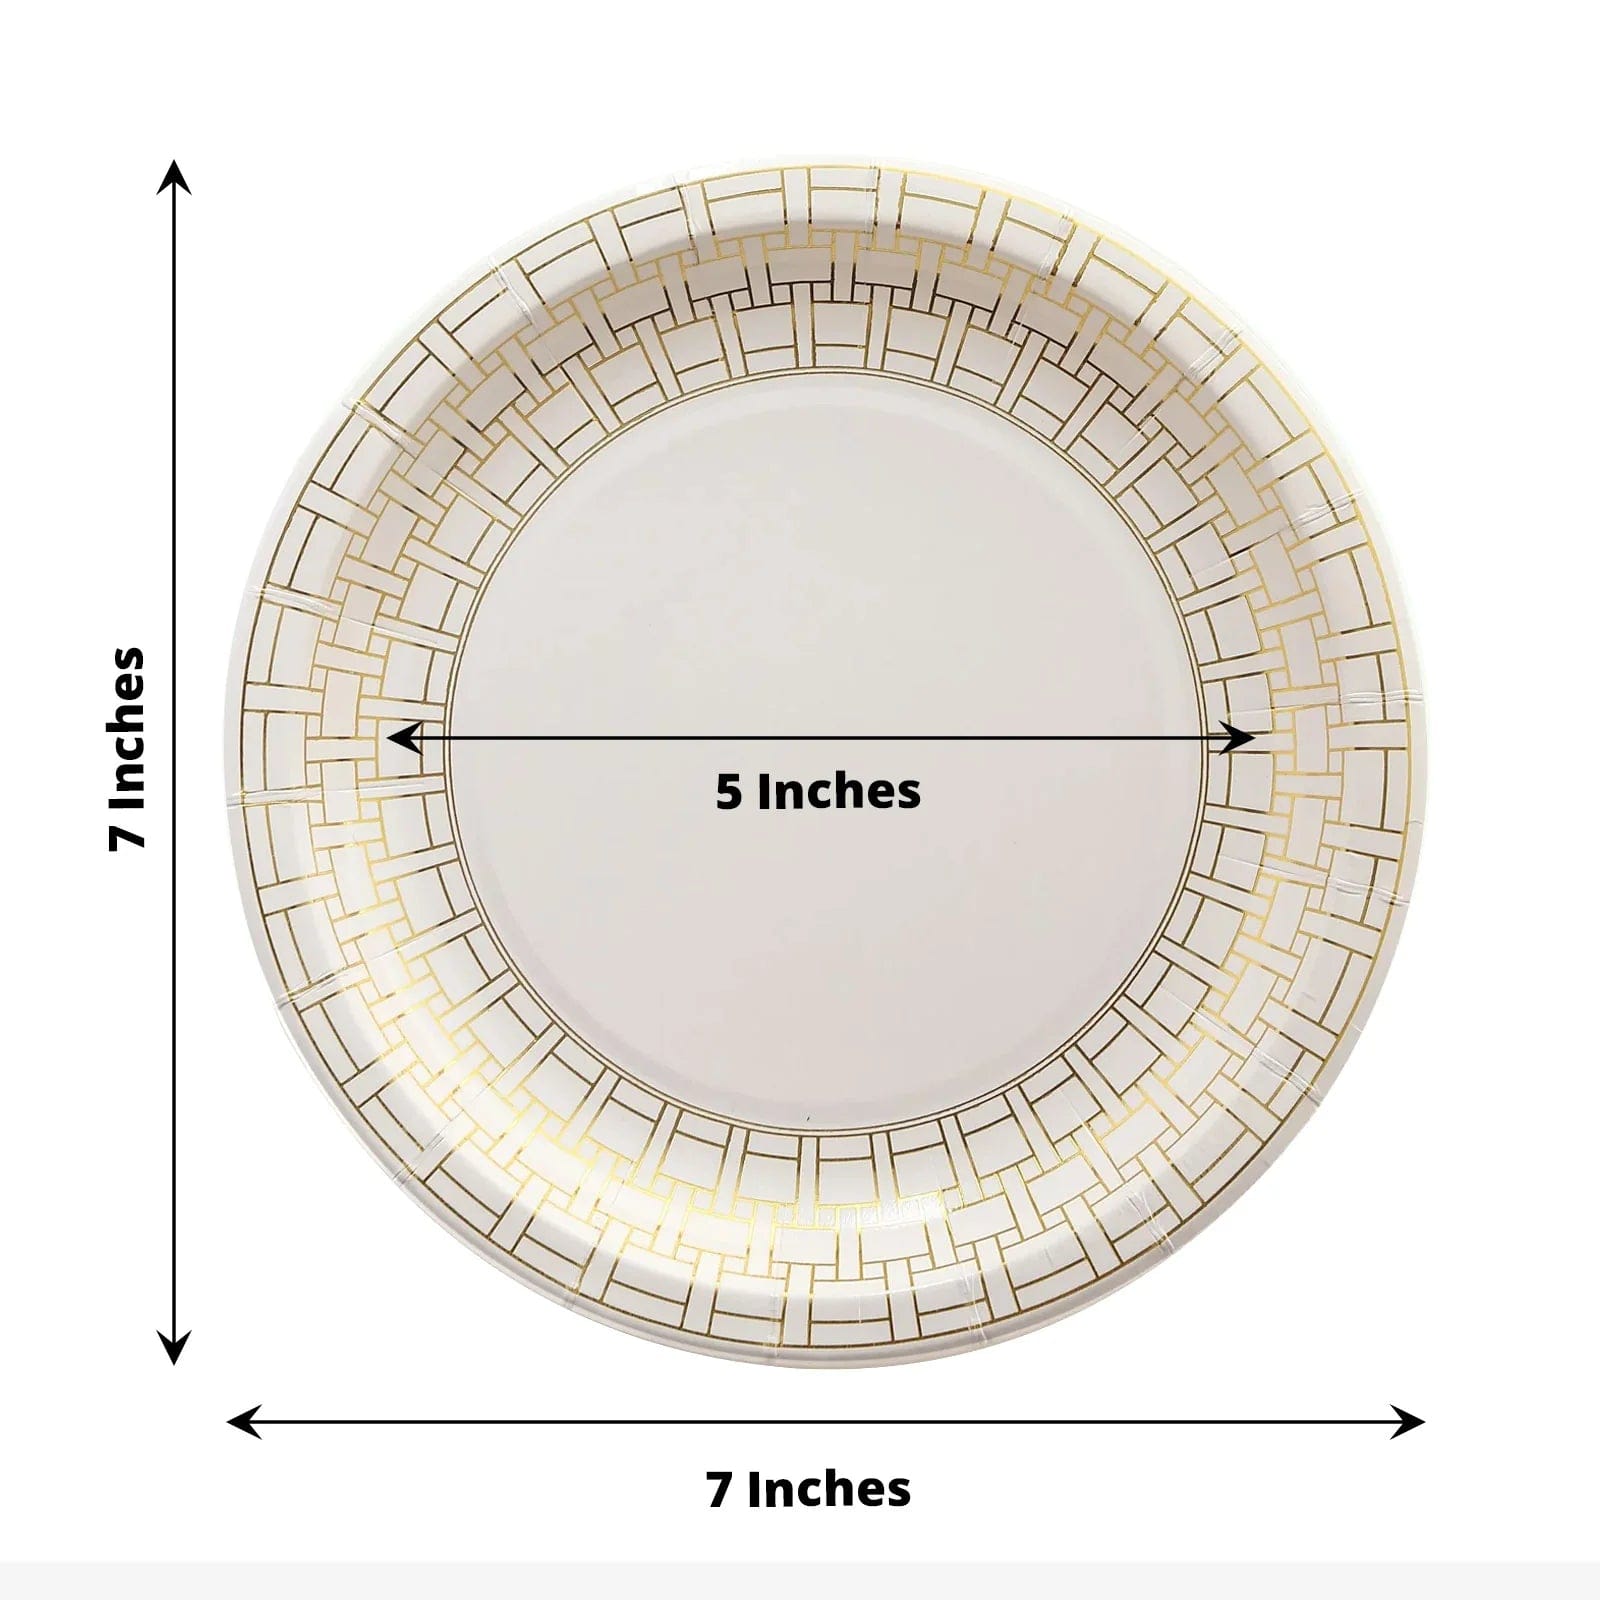 25 Dinner Paper Plates with Gold Basketweave Pattern Rim